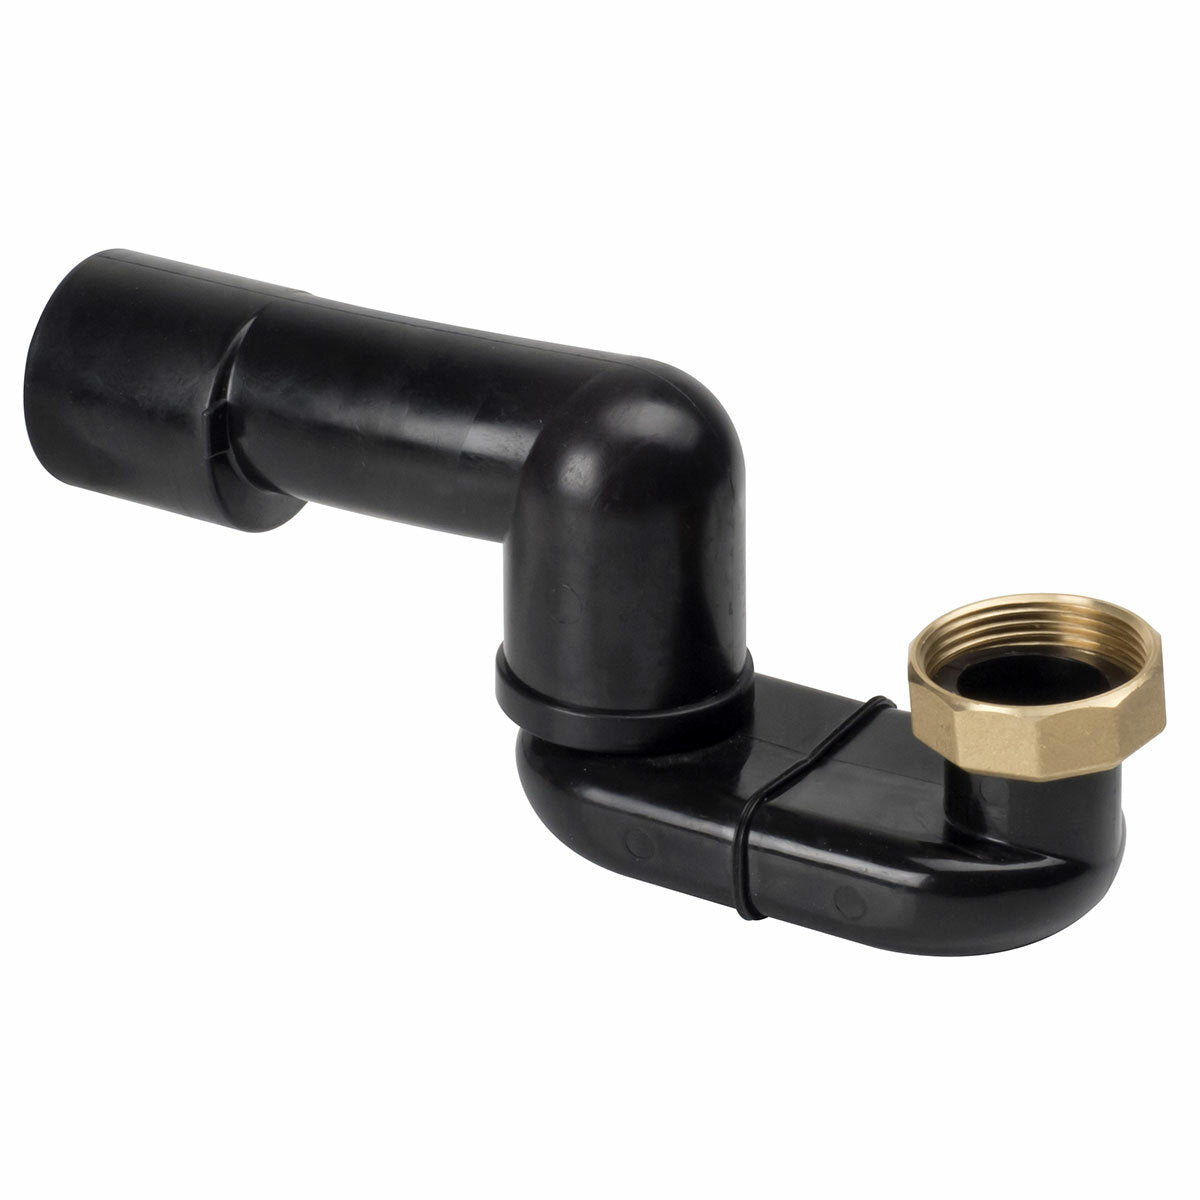 Valsir A3 siphon in HDPE for bath drain with brass nut, connection to be welded